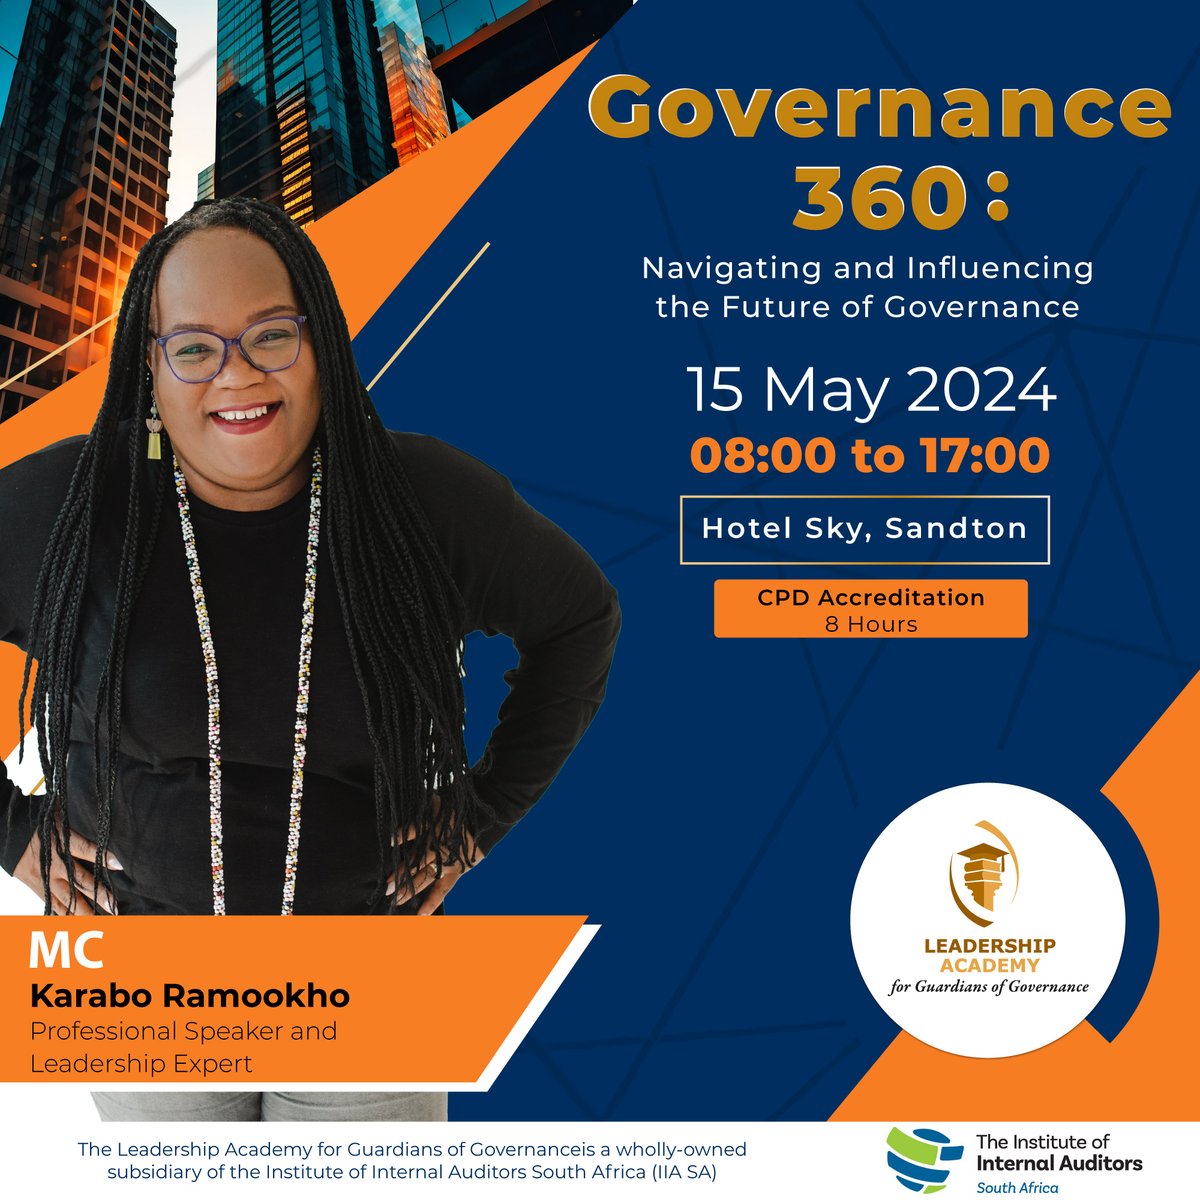 Register now - evolve.eventoptions.co.za/register/gover… – and join Karabo Ramookho, as the Master of Ceremonies, at our upcoming Governance 360: Navigating and Influencing the Future of Governance Conference.

#CPDAccreditation
#Governance360
@IIASOUTHAFRICA